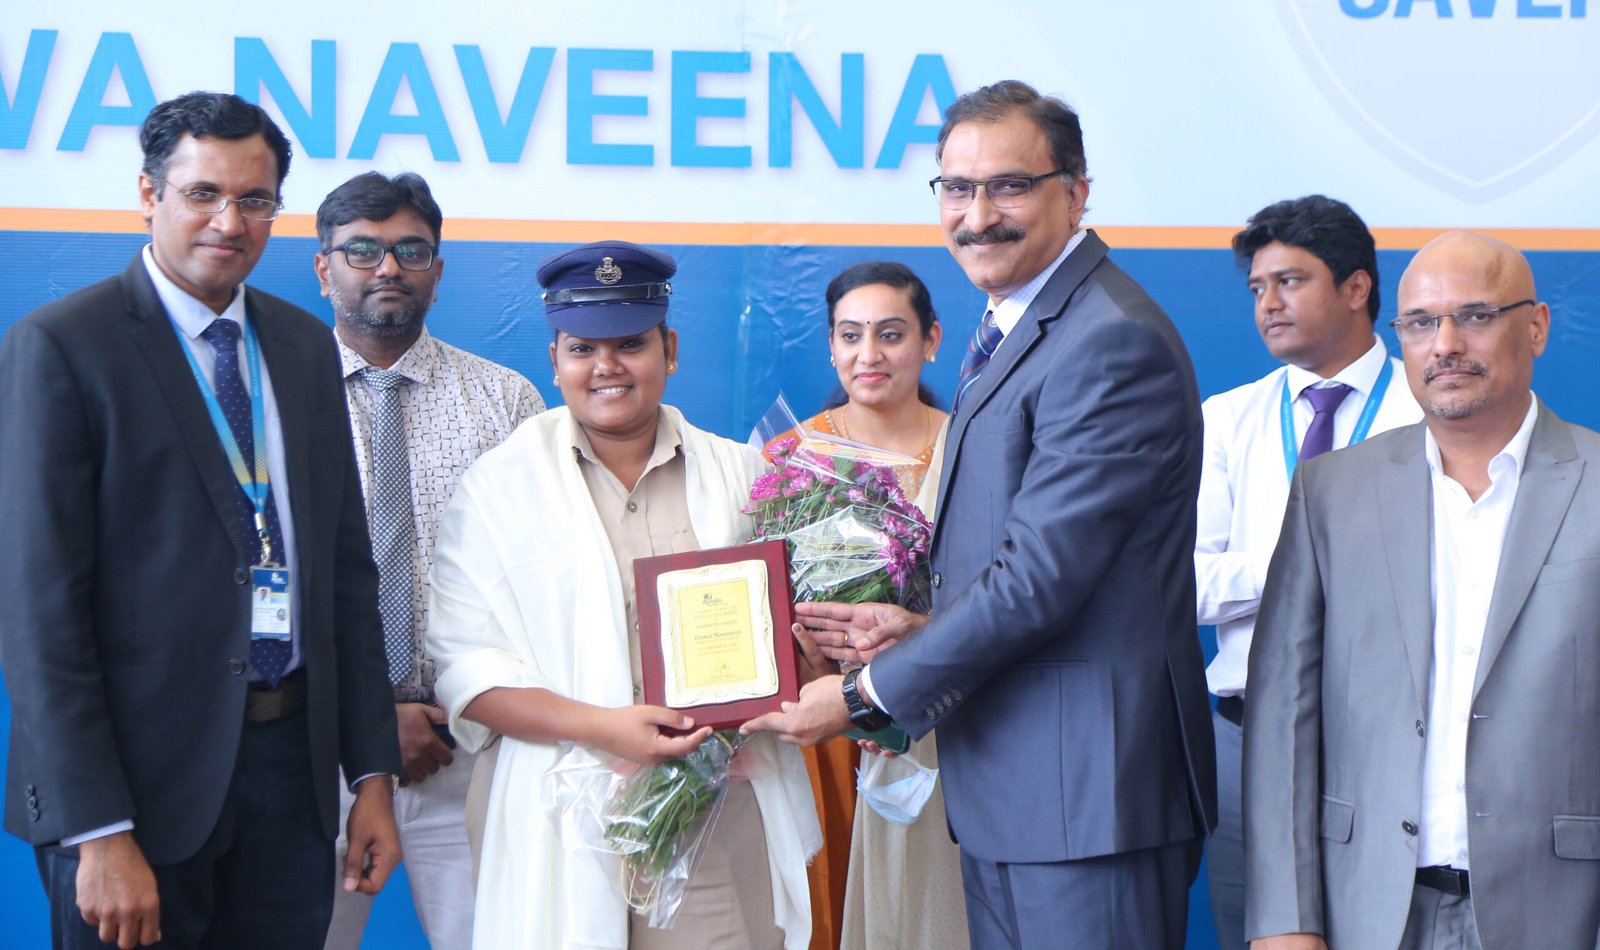 Apollo Hospitals lauds police constable Dawa Naveena for her exemplary deed of saving a precious life with CPR